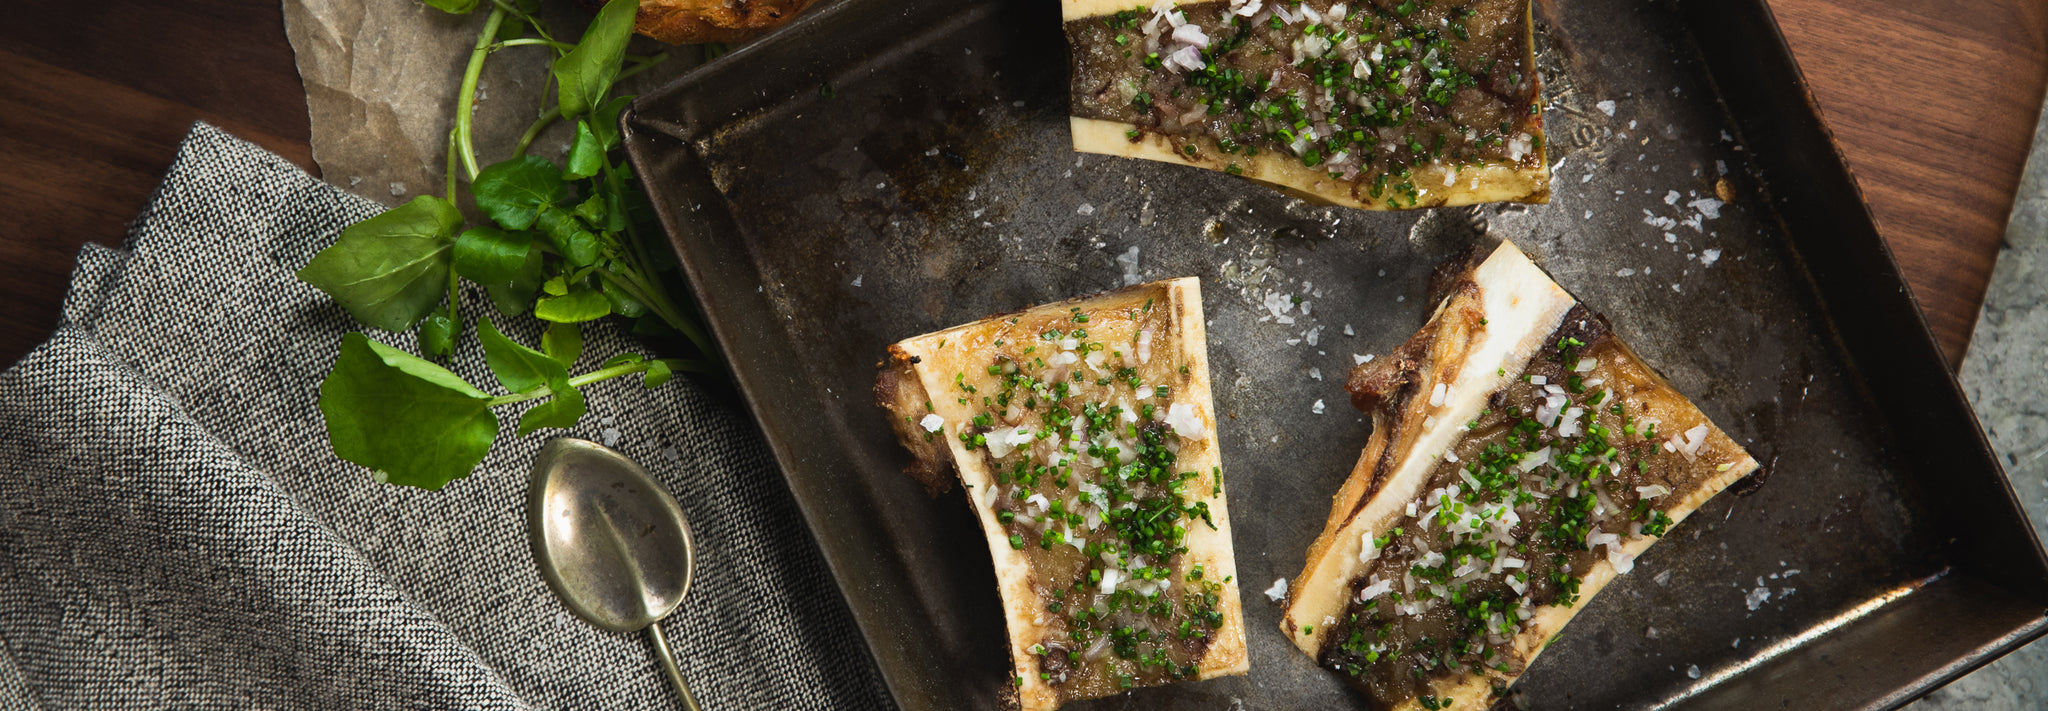 Roasted Bone Marrow with Chives & Shallots - Recipe - Roccbox